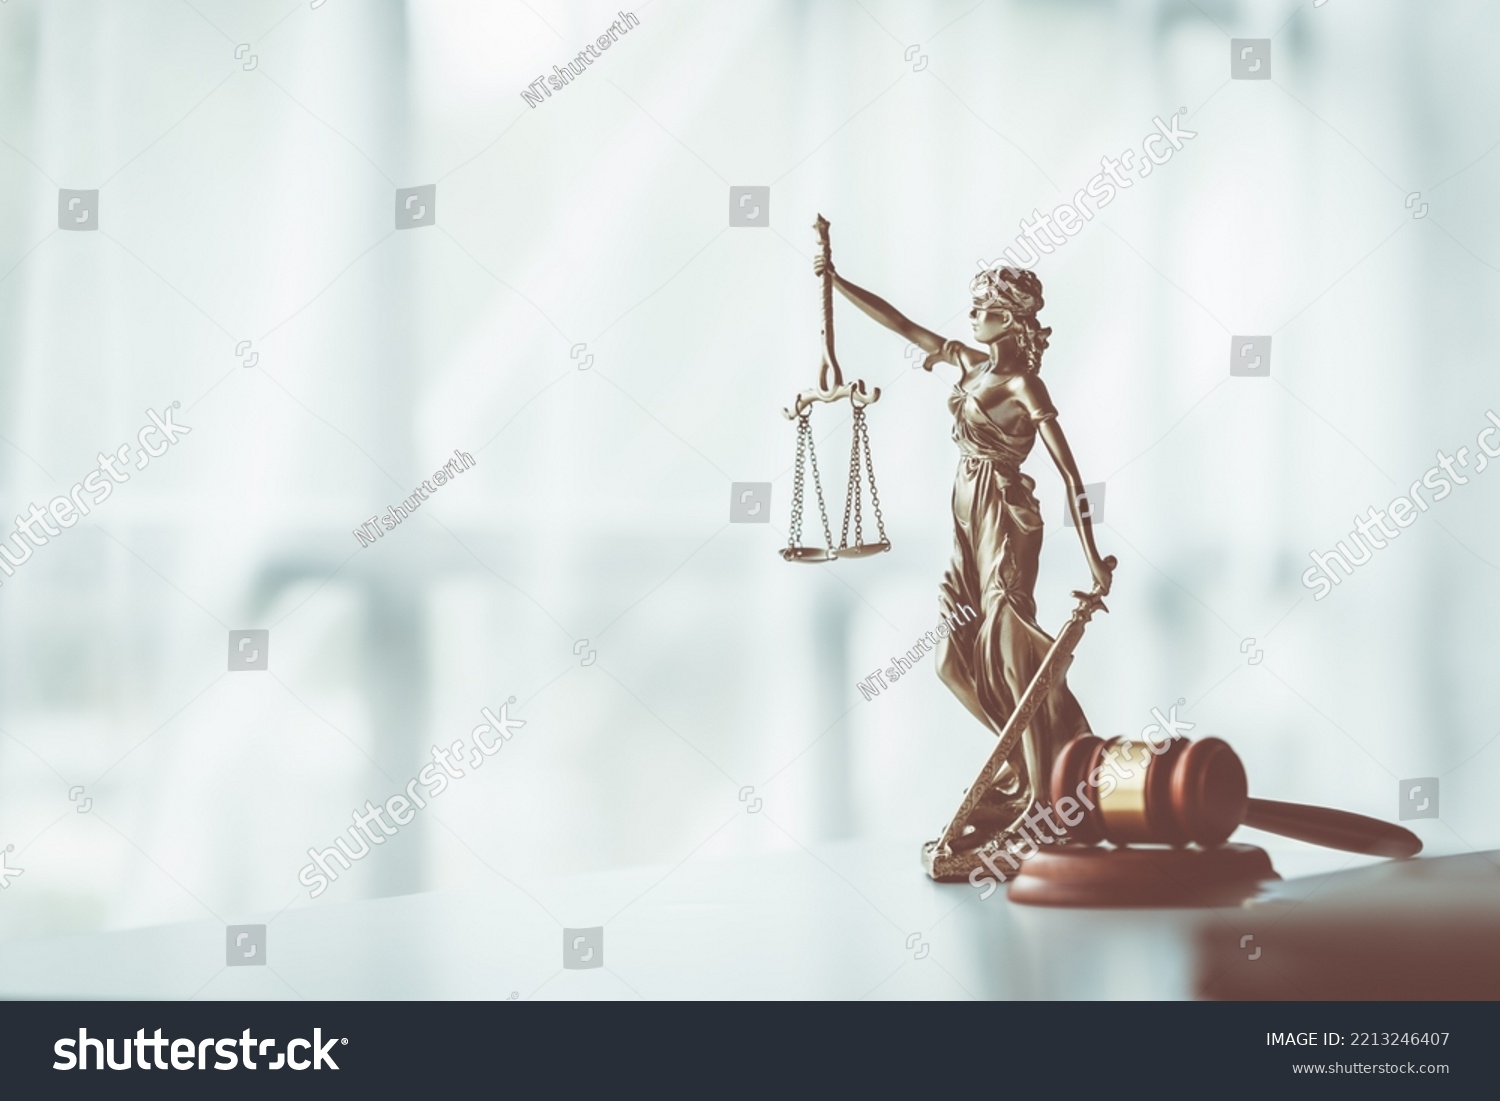 The Statue of Justice - lady justice or Iustitia  Justitia the Roman goddess of Justice #2213246407